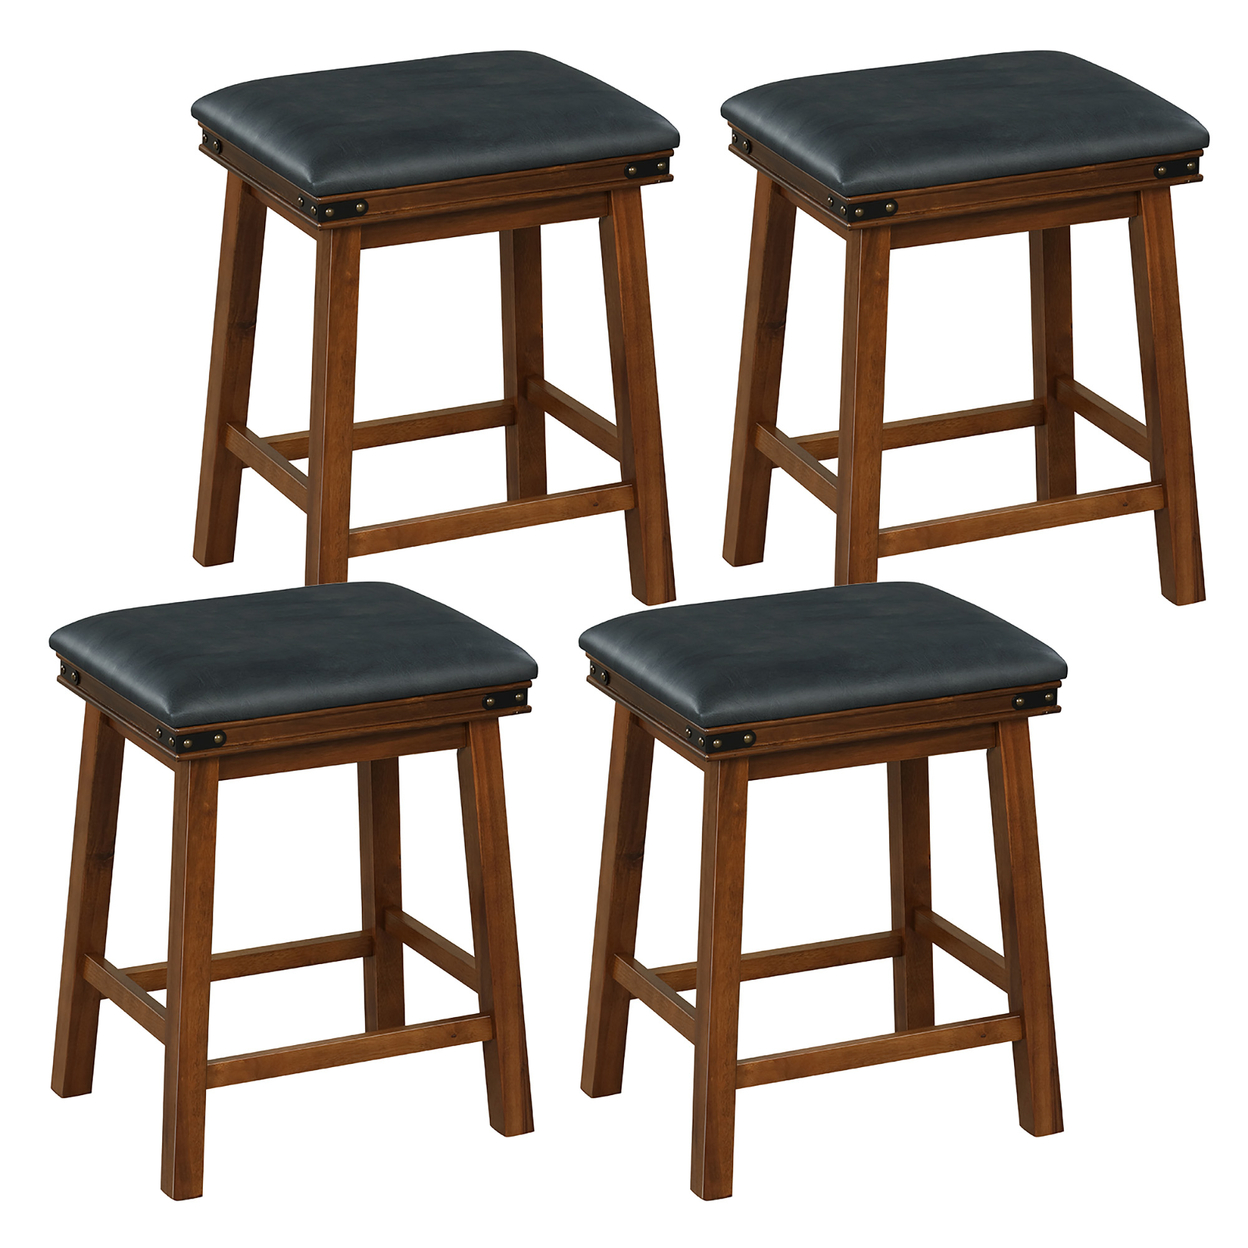 Set Of 4 PU Leather Bar Stools 24'' Counter Height Dining Stools W/ Upholstered Seat